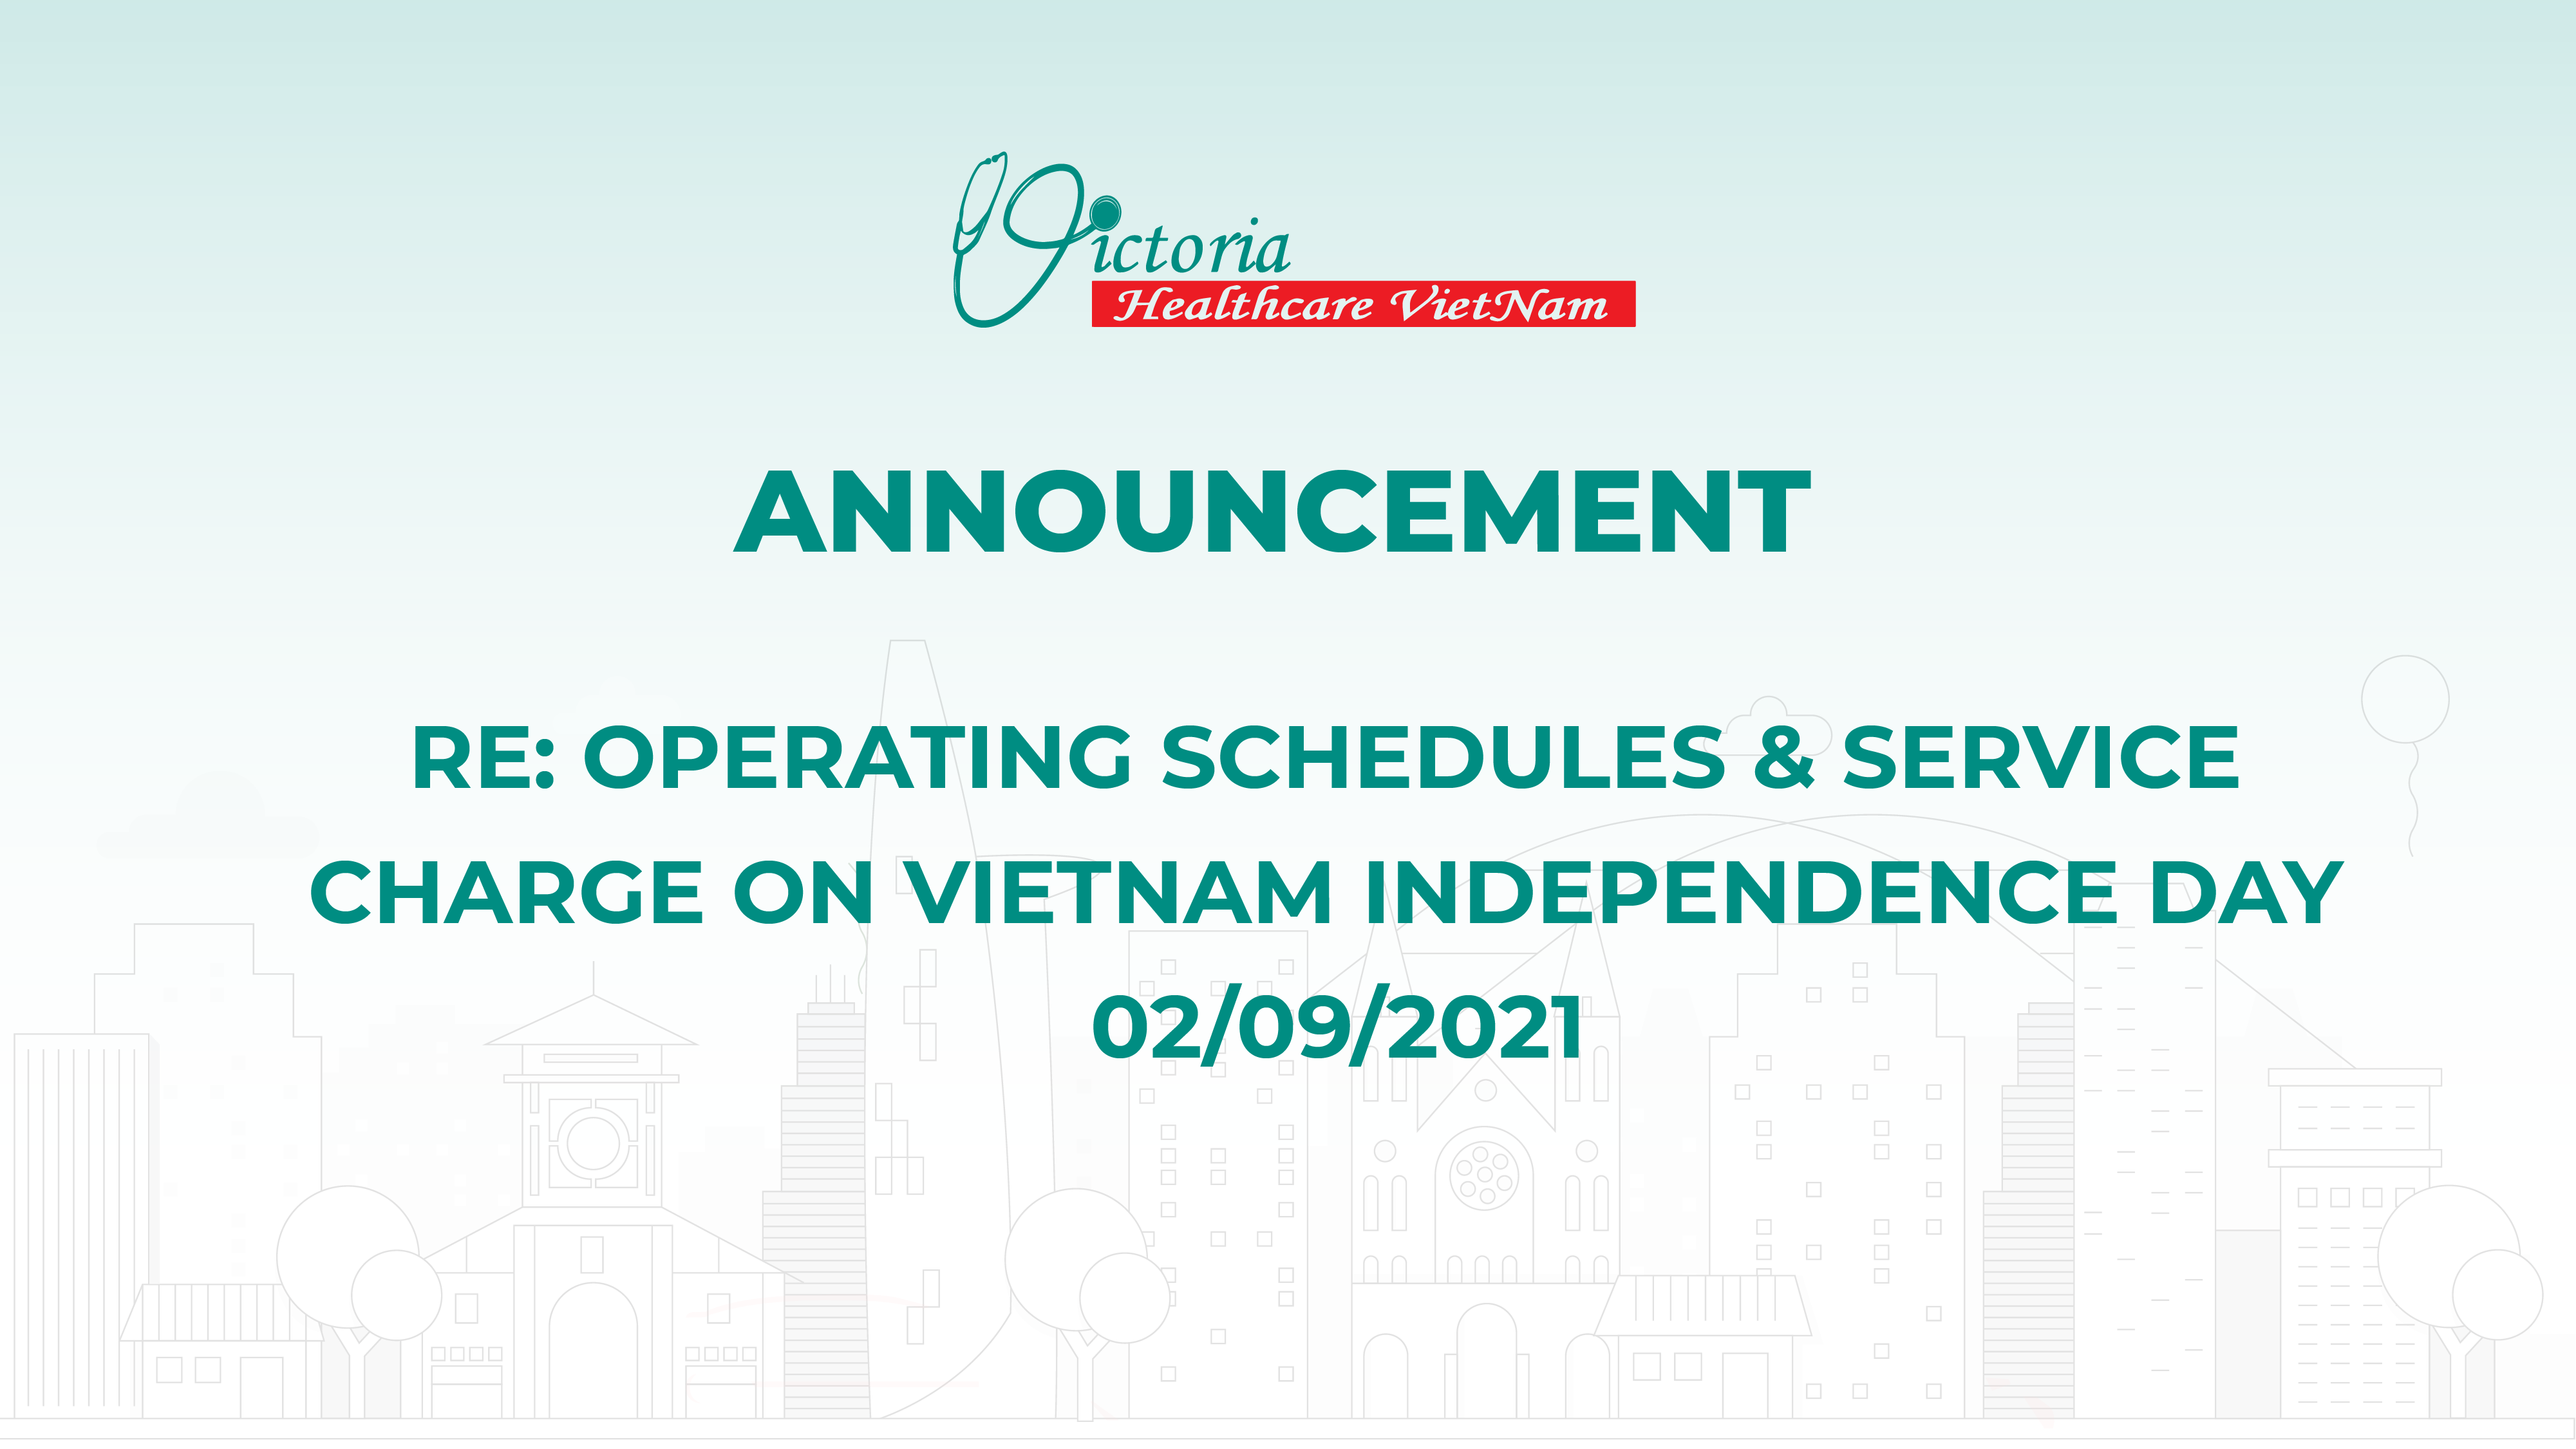 Operating Schedules & Service charge on Vietnam Independence Day 02/09/2021